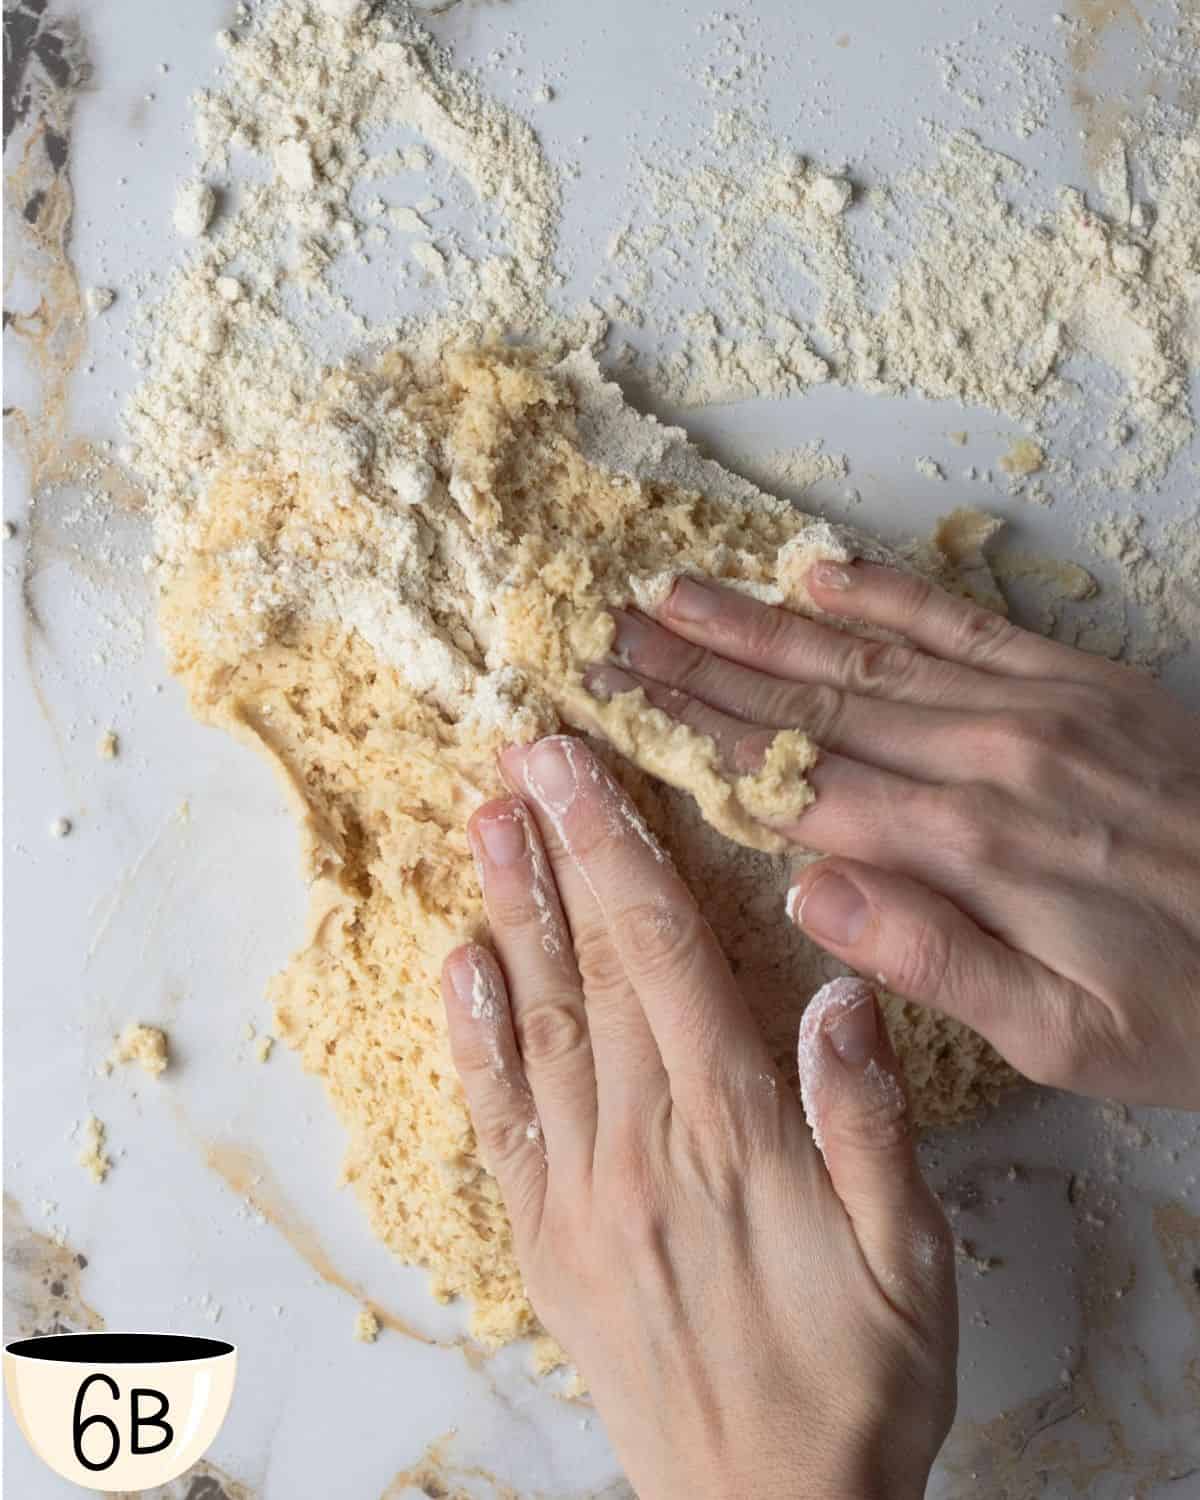 Hands kneading the dough on a floured surface, an important step in developing the texture for gluten-free bagels.